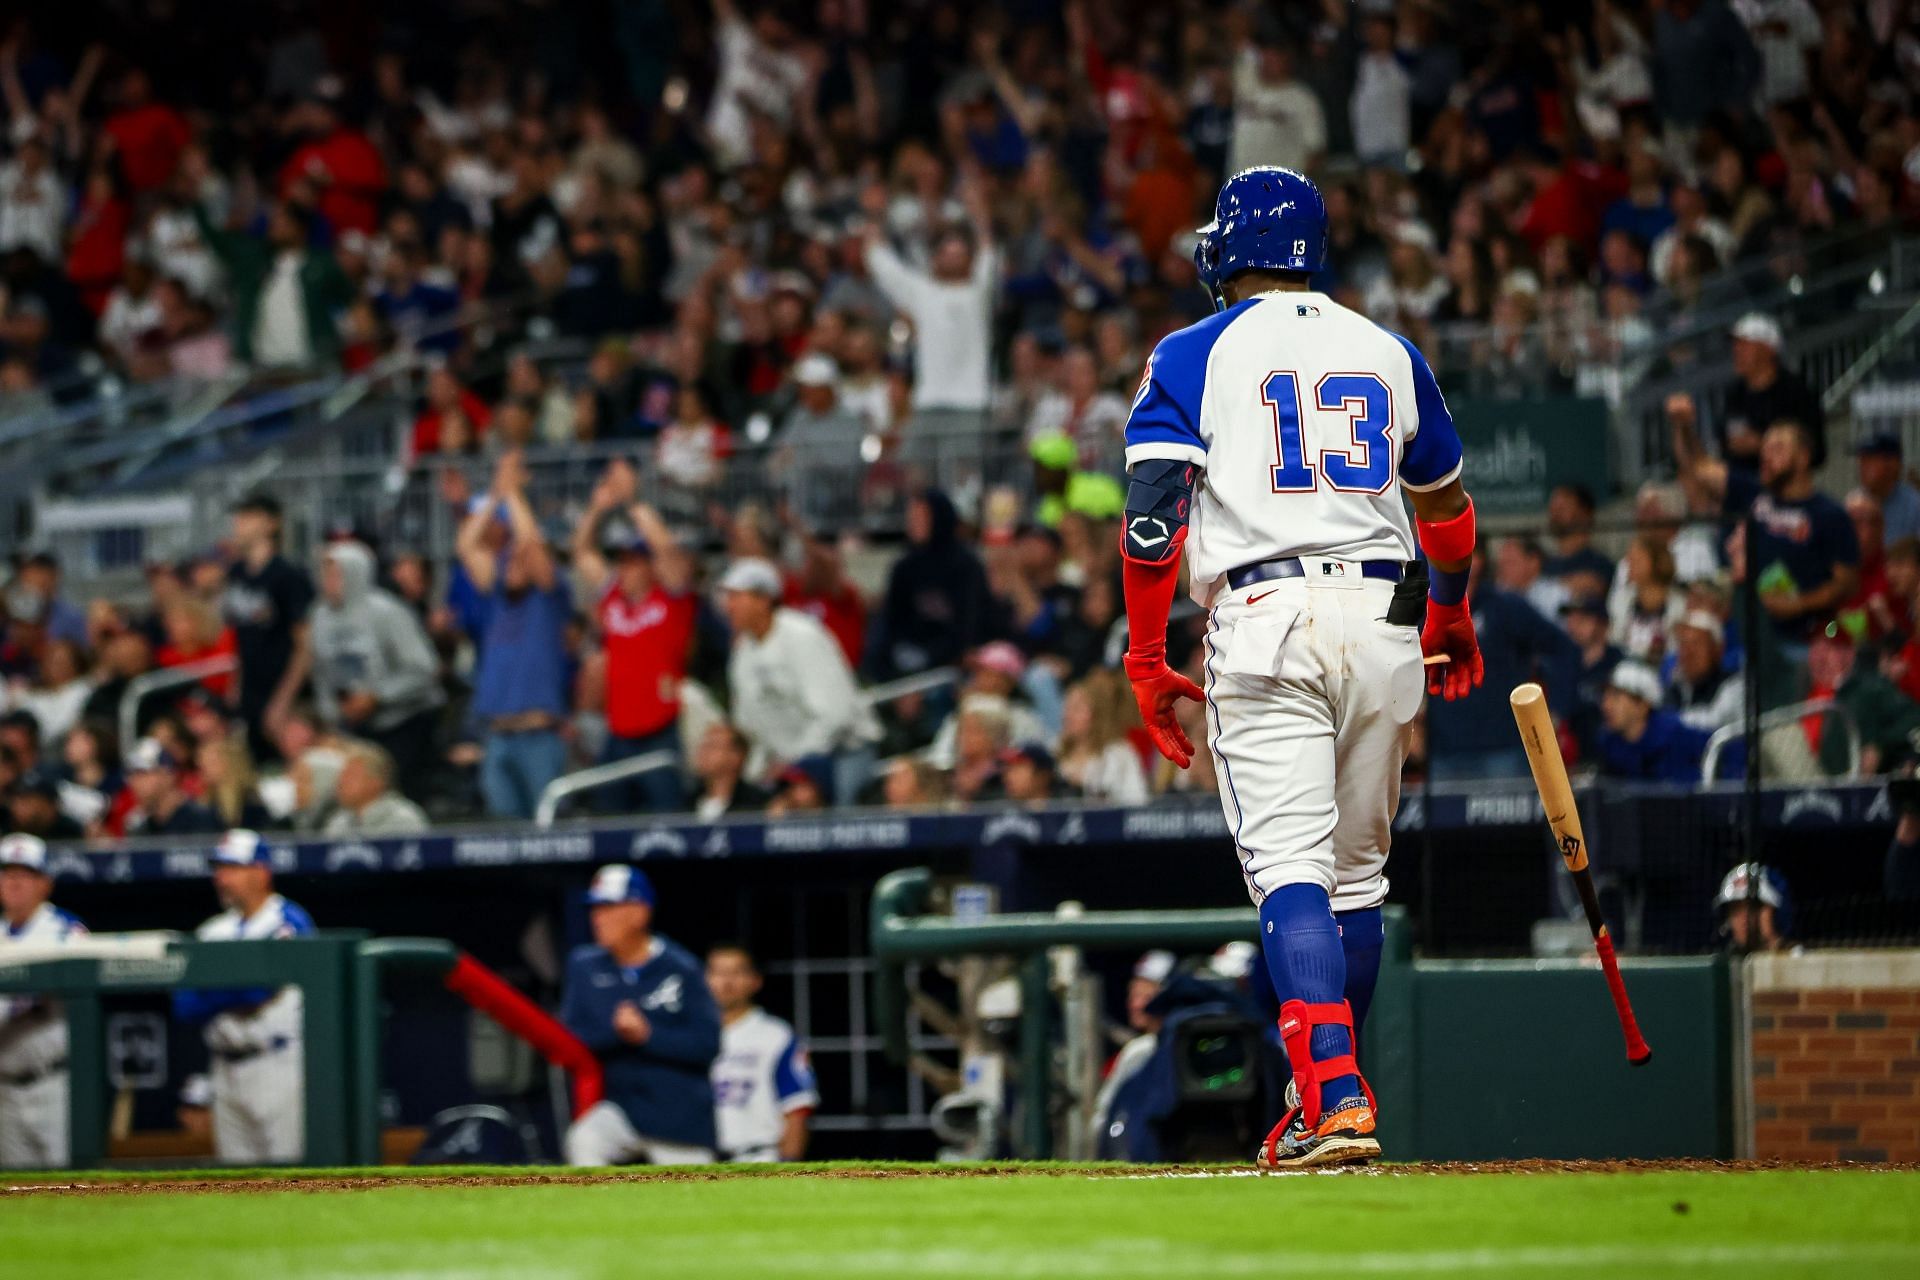 Ronald Acuña Jr. DESTROYS a solo home run to left and uses LeBron James'  classic celebration 